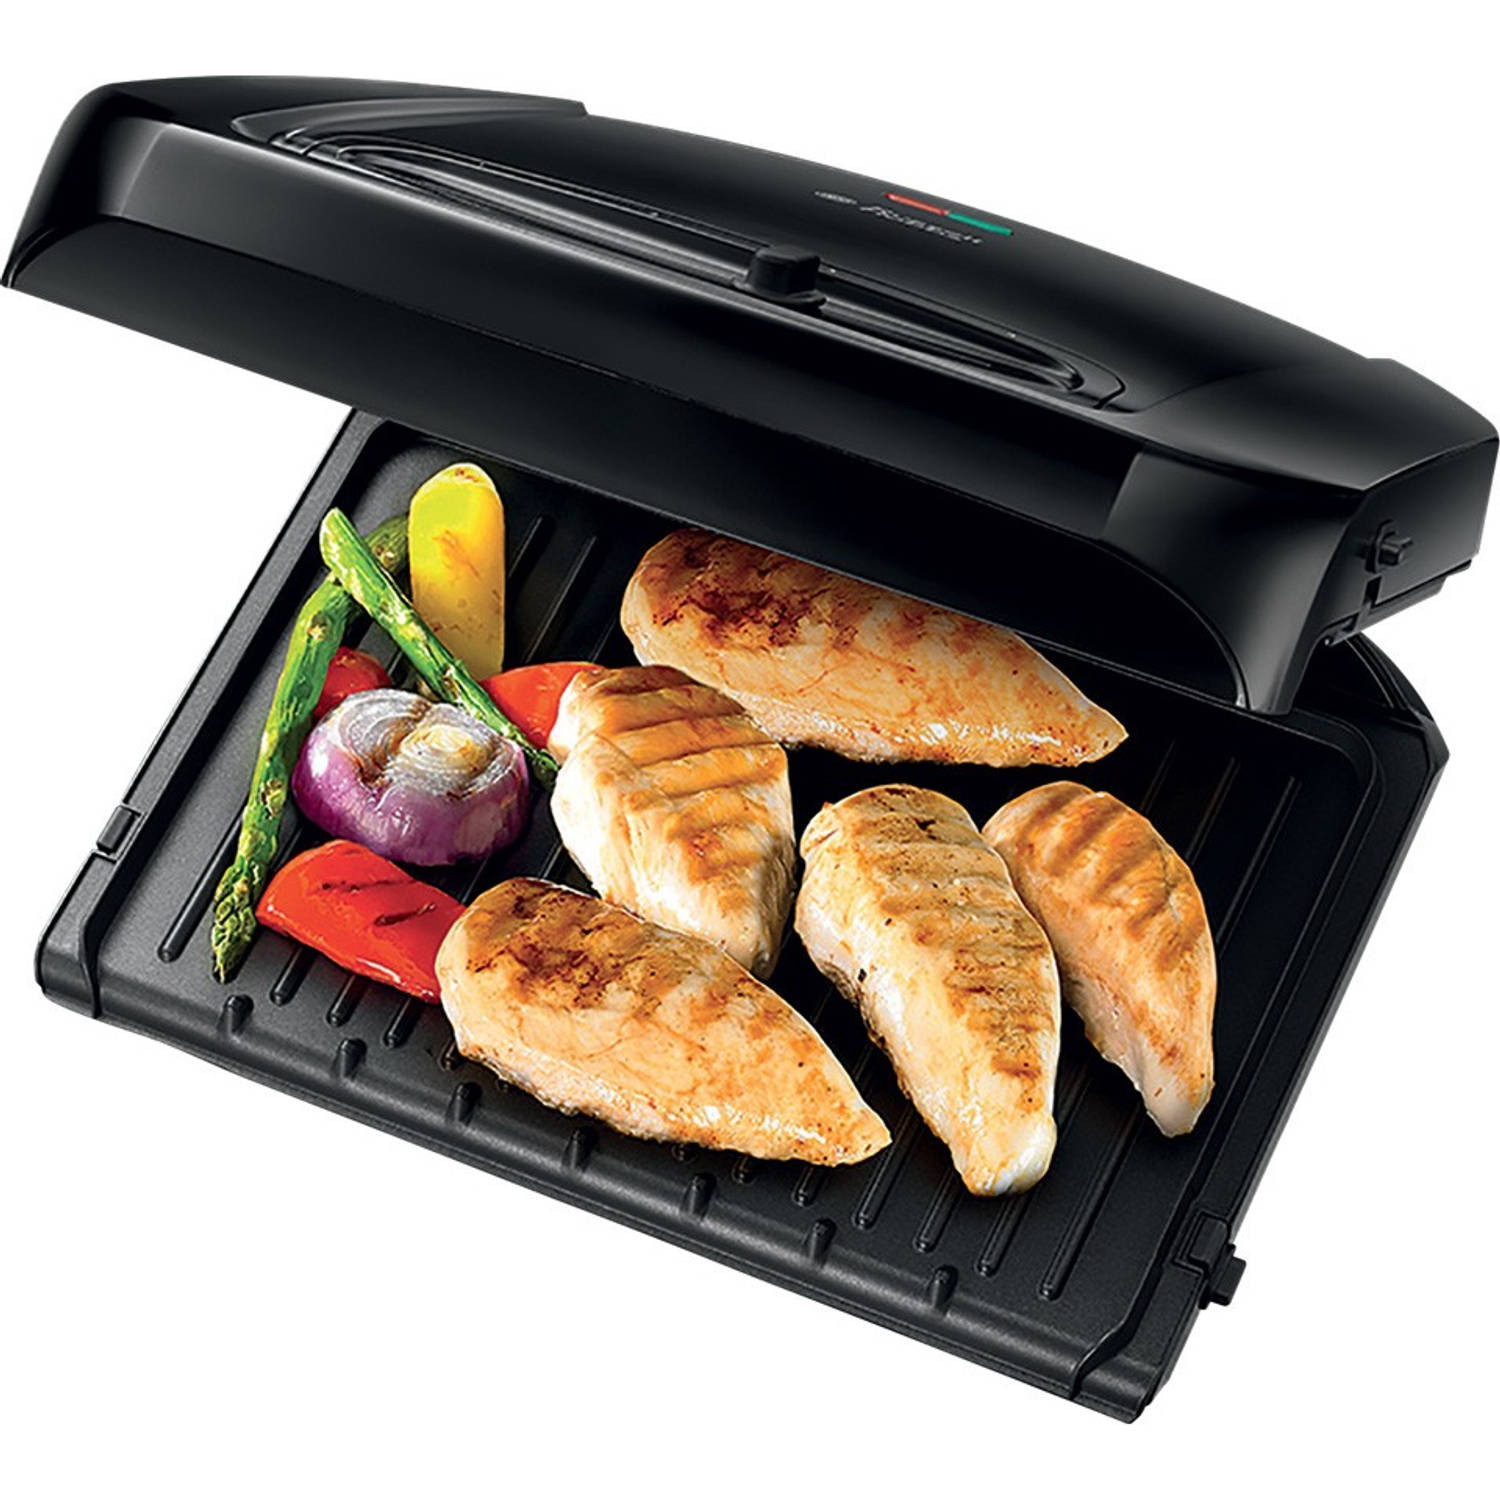 Russel Hobbs Contactgrill Entertaining